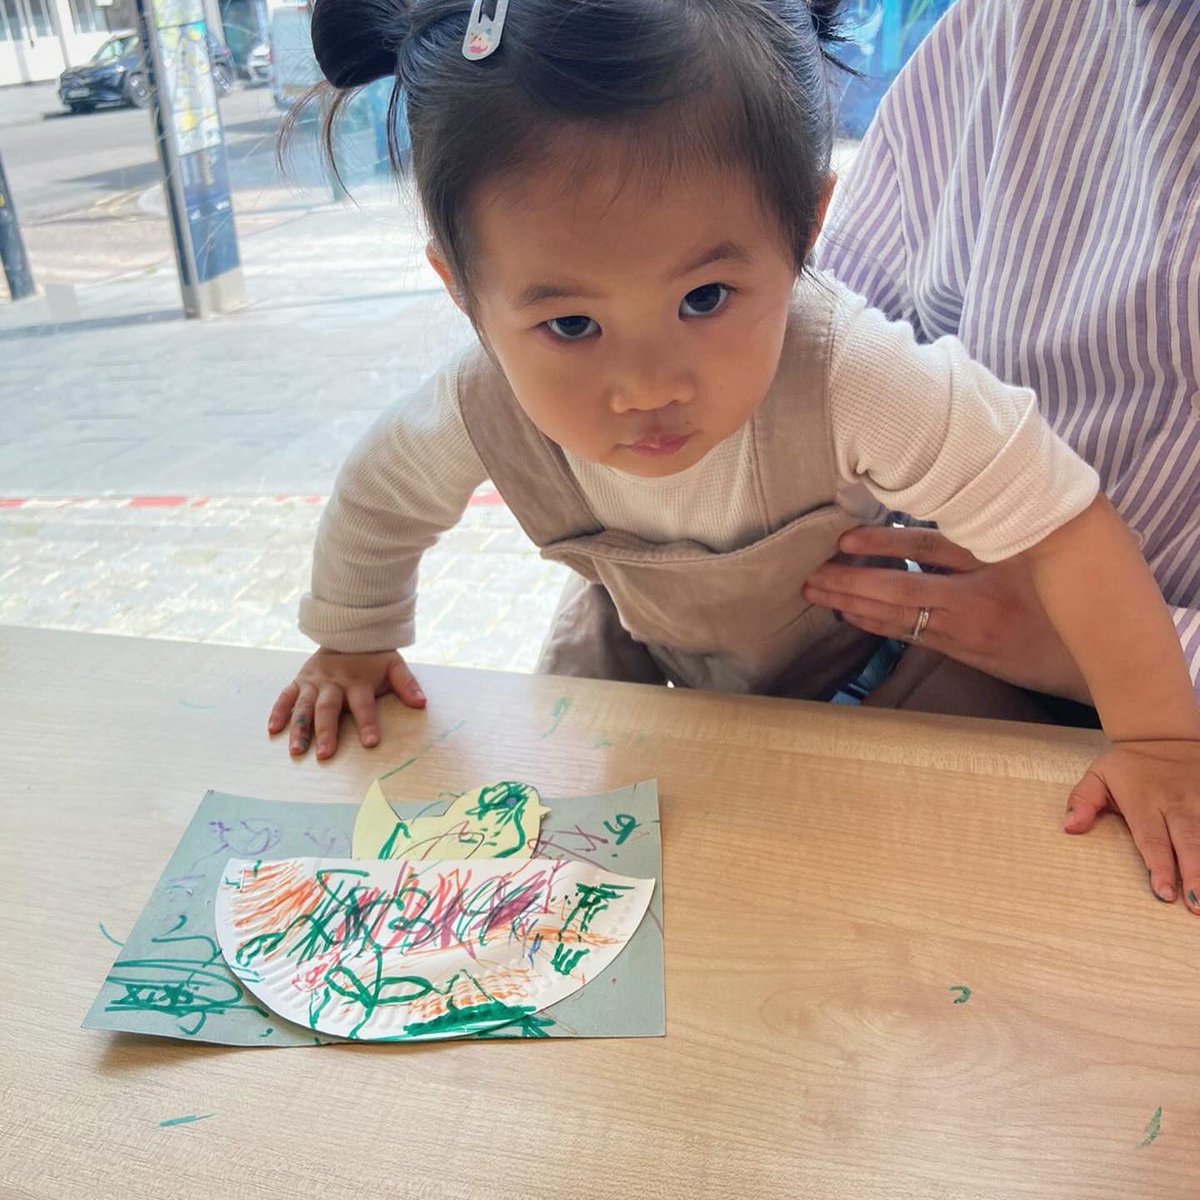 We had lots of fun at #WoolwichLibrary’s #MessyMorning on Friday! 🎨 We made chick nests using different colours and shapes! 🐣 Join the fun on Fridays from 10:30-11:30am, make some art, make friends + borrow books! 📚 #LoveYourLibrary